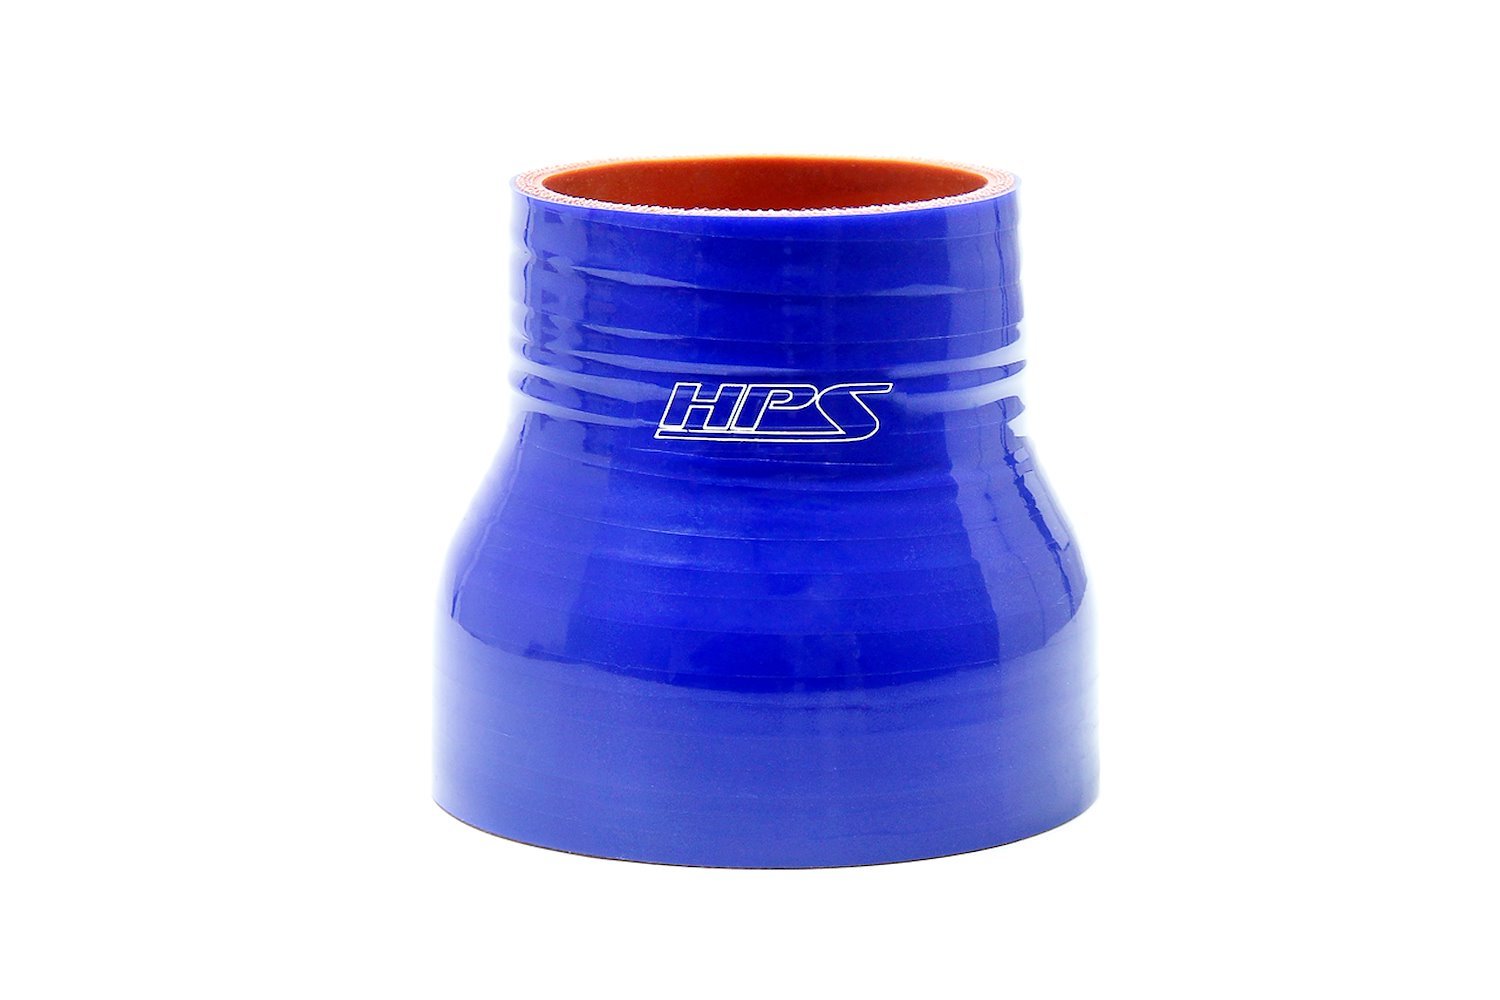 HTSR-300-325-BLUE Silicone Reducer Hose, High-Temp 4-Ply Reinforced, 3 in. - 3-1/4 in. ID, 3 in. Long, Blue